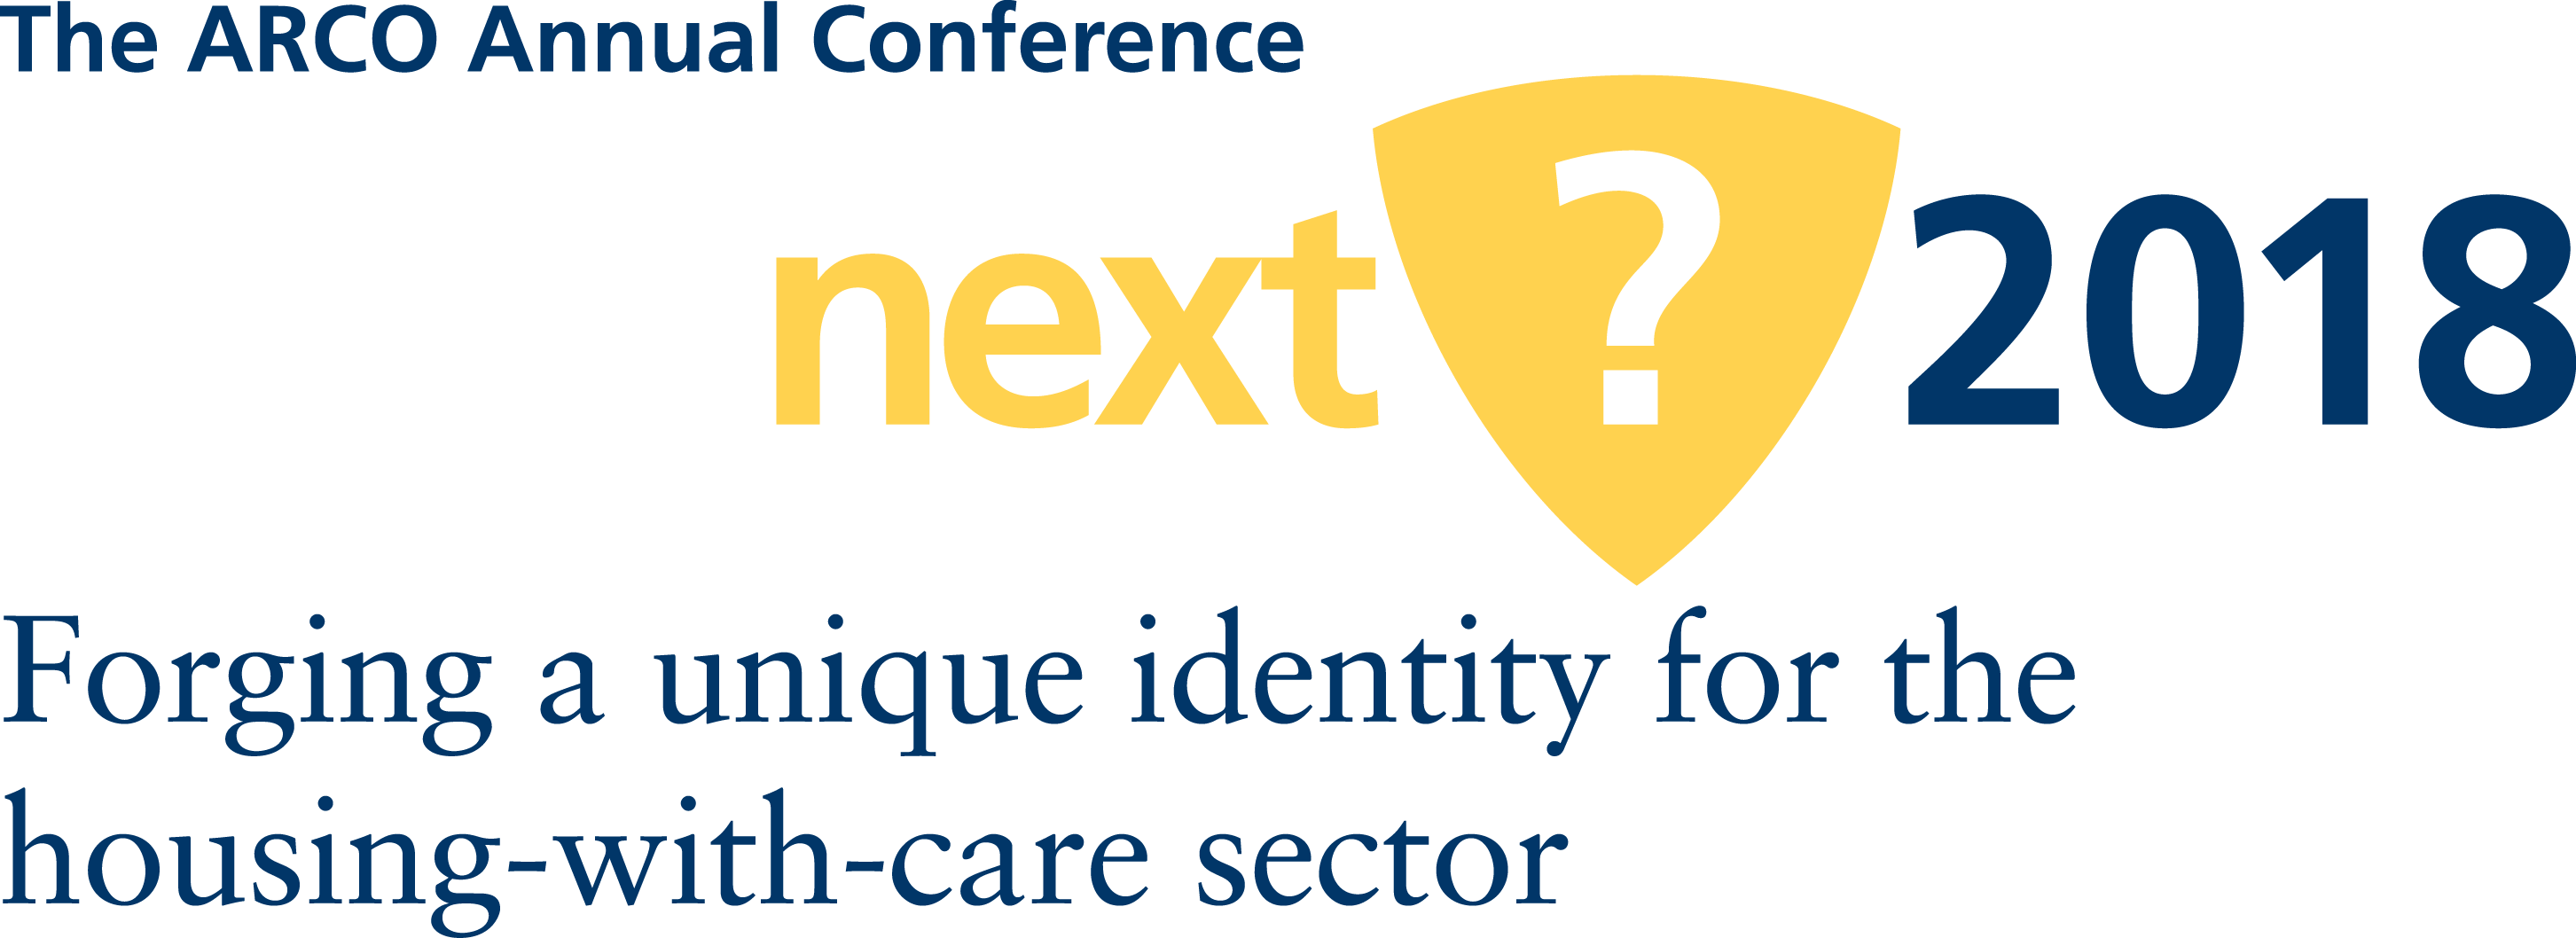 A R C O Conference2018 What Next